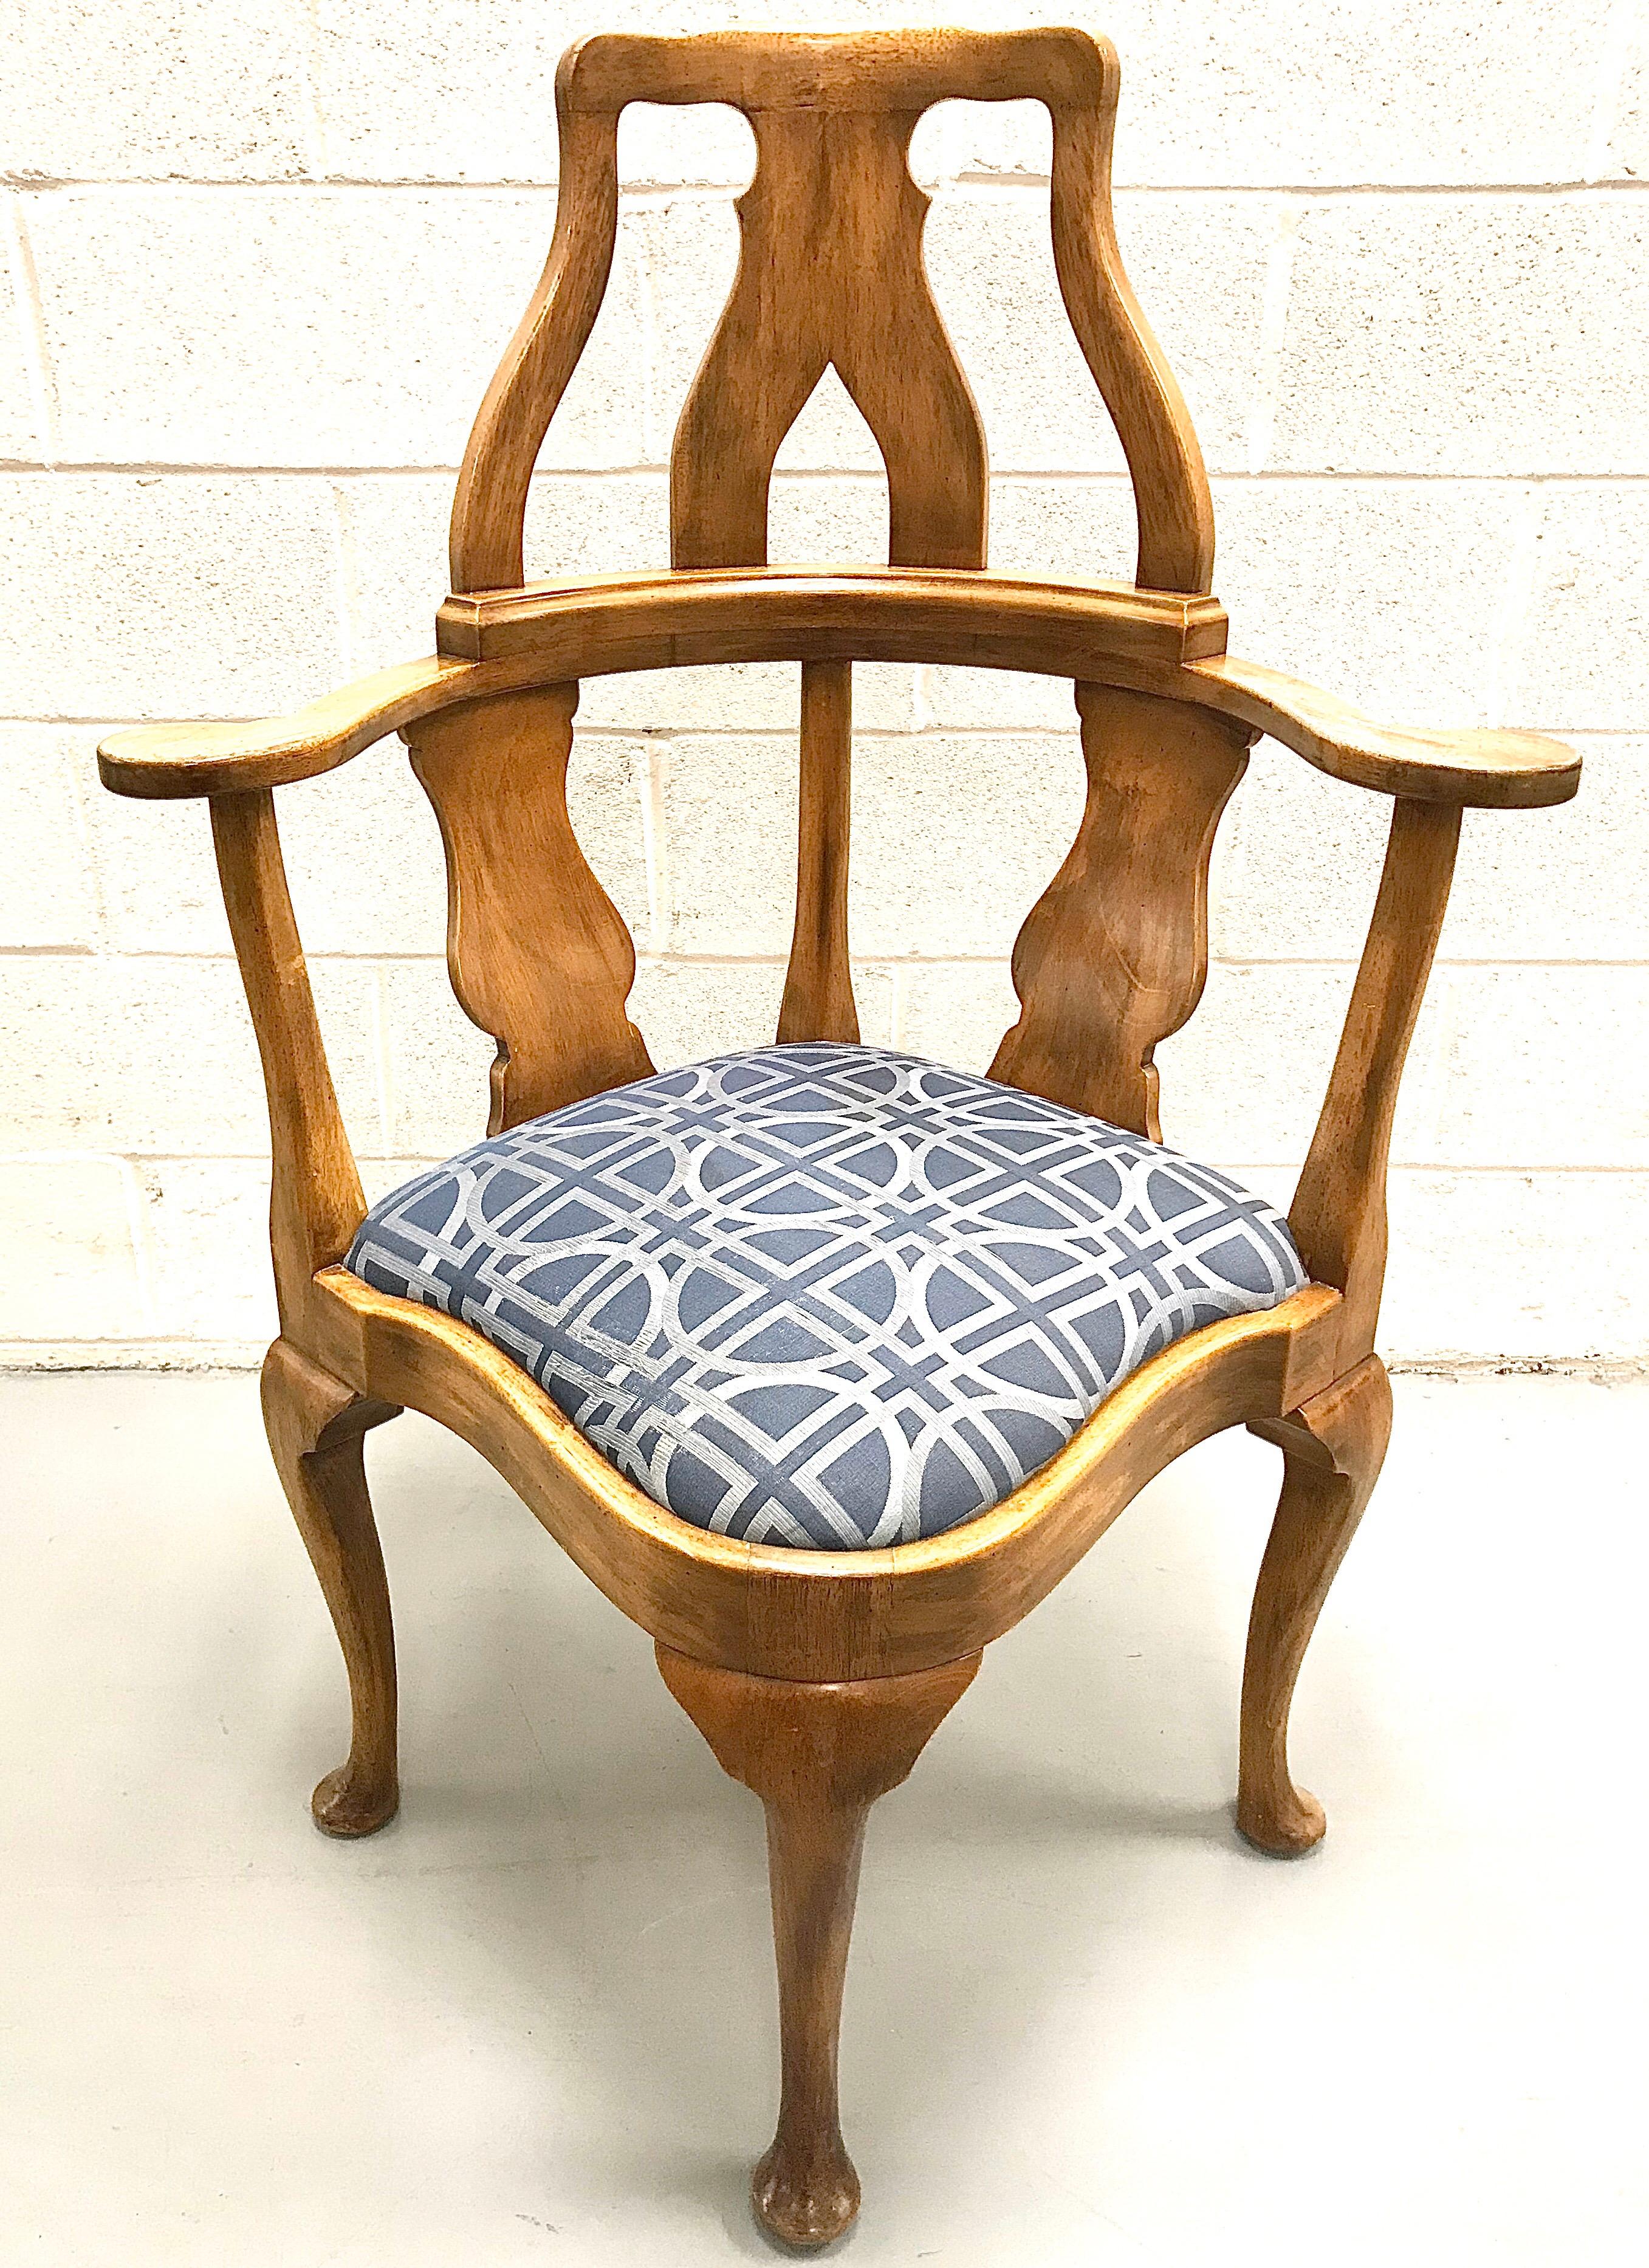 Large scale Queen Anne style high back corner chair.